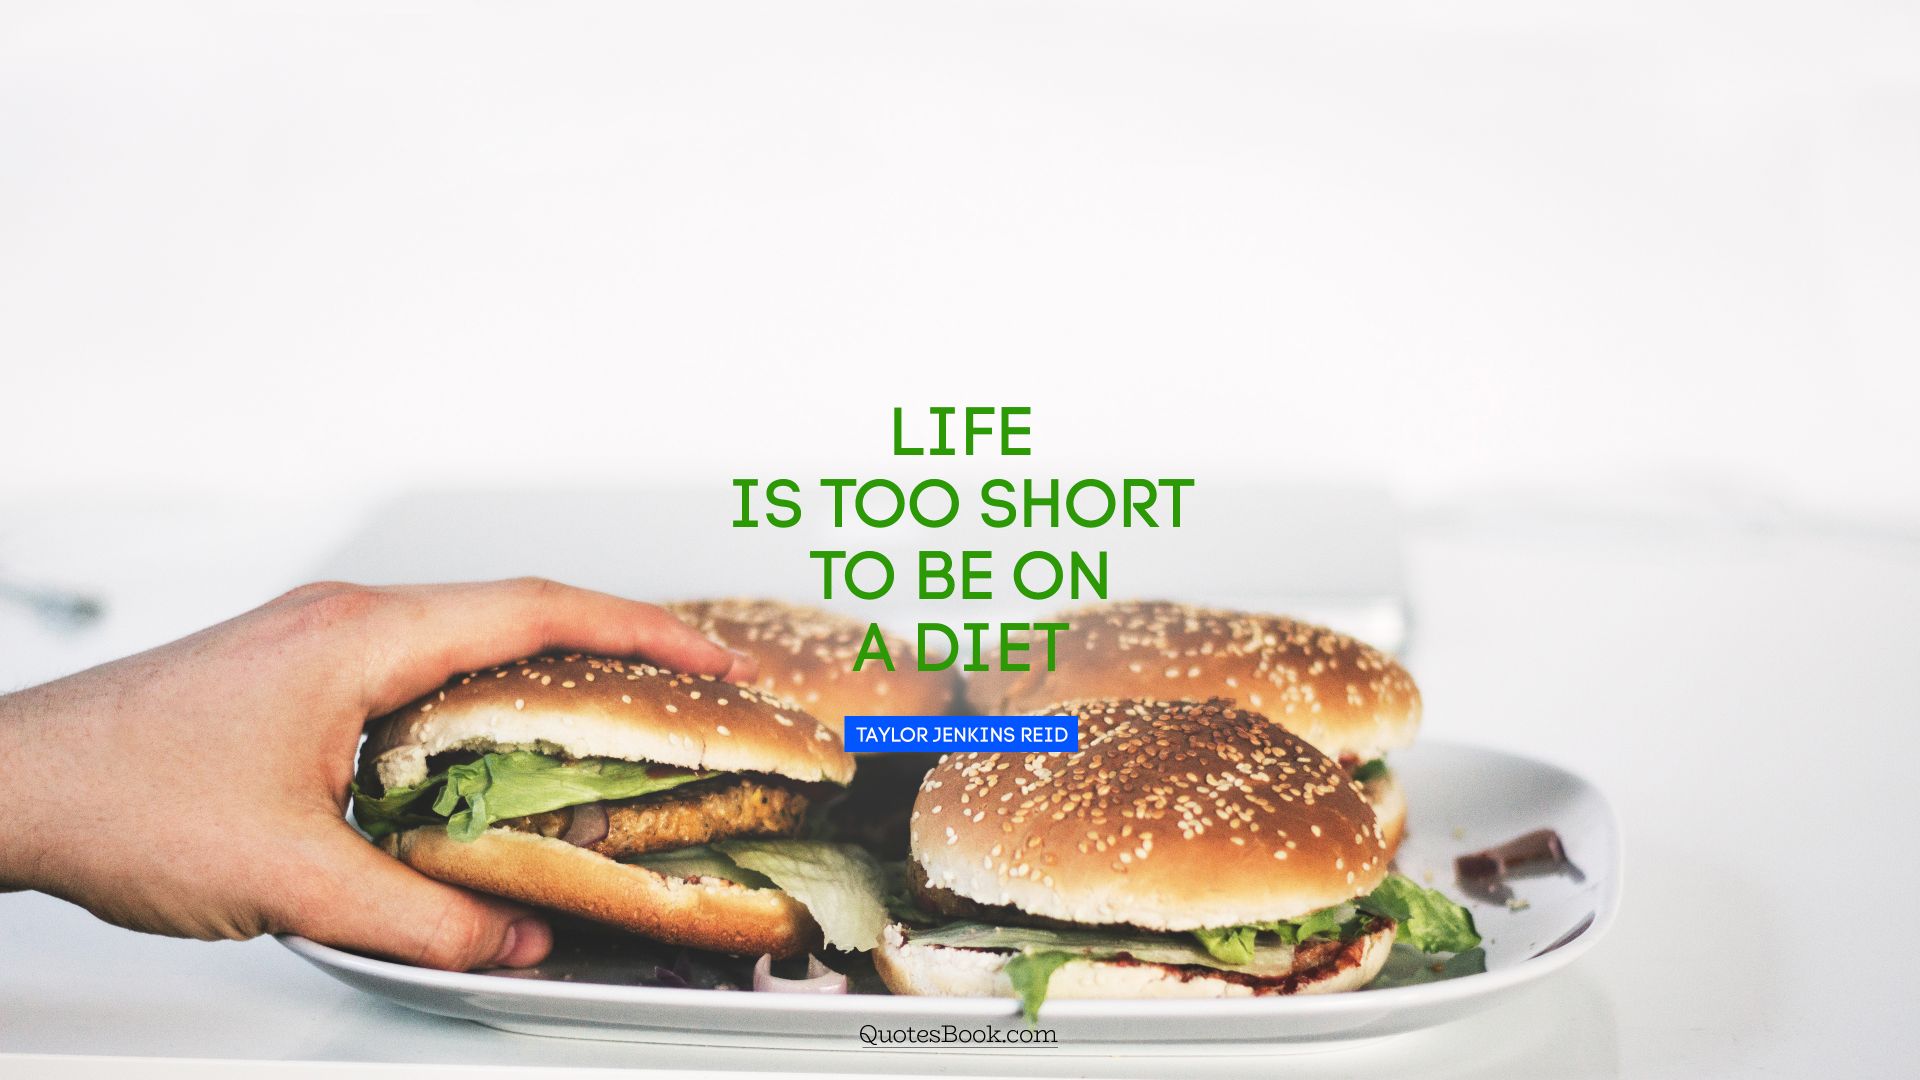 Life is too short to be on a diet. - Quote by Taylor Jenkins Reid